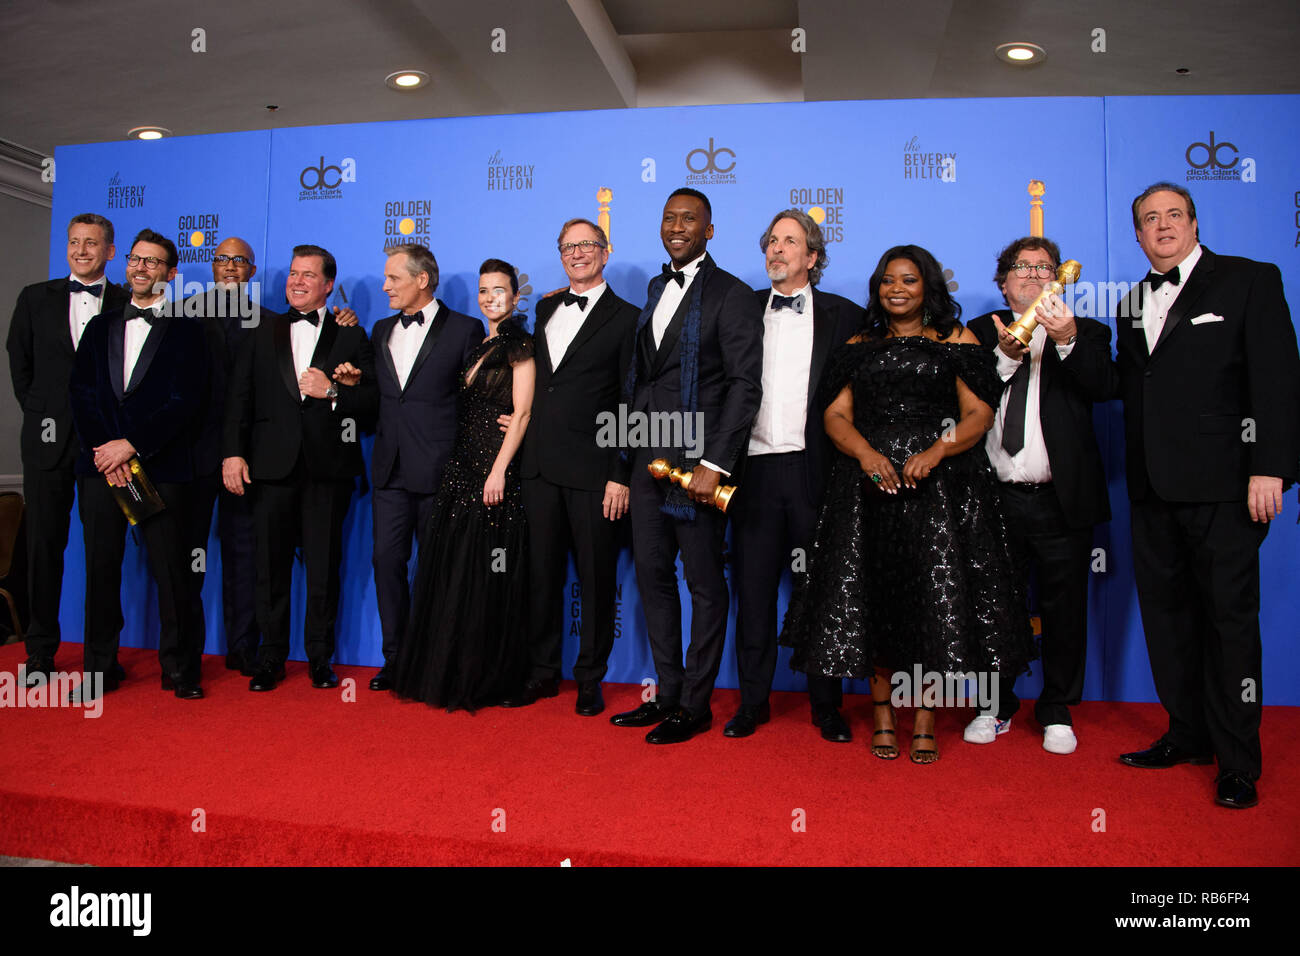 Beverly Hills, USA. 06th Jan, 2019. After winning the Golden Globe for BEST MOTION PICTURE - COMEDY OR MUSICAL for 'Green Book', John Sloss, Jonathan King, Kwame Parker, Brian Currie, Viggo Mortensen, Linda Cardellini, Jim Burke, Mahershala Ali, Peter Farrelly, Octavia Spencer, Charles B. Wessler, Nick Vallelonga pose with the award backstage in the press room at the 76th Annual Golden Globe Awards at the Beverly Hilton in Beverly Hills, CA on Sunday, January 6, 2019. Credit: PictureLux/The Hollywood Archive/Alamy Live News Stock Photo